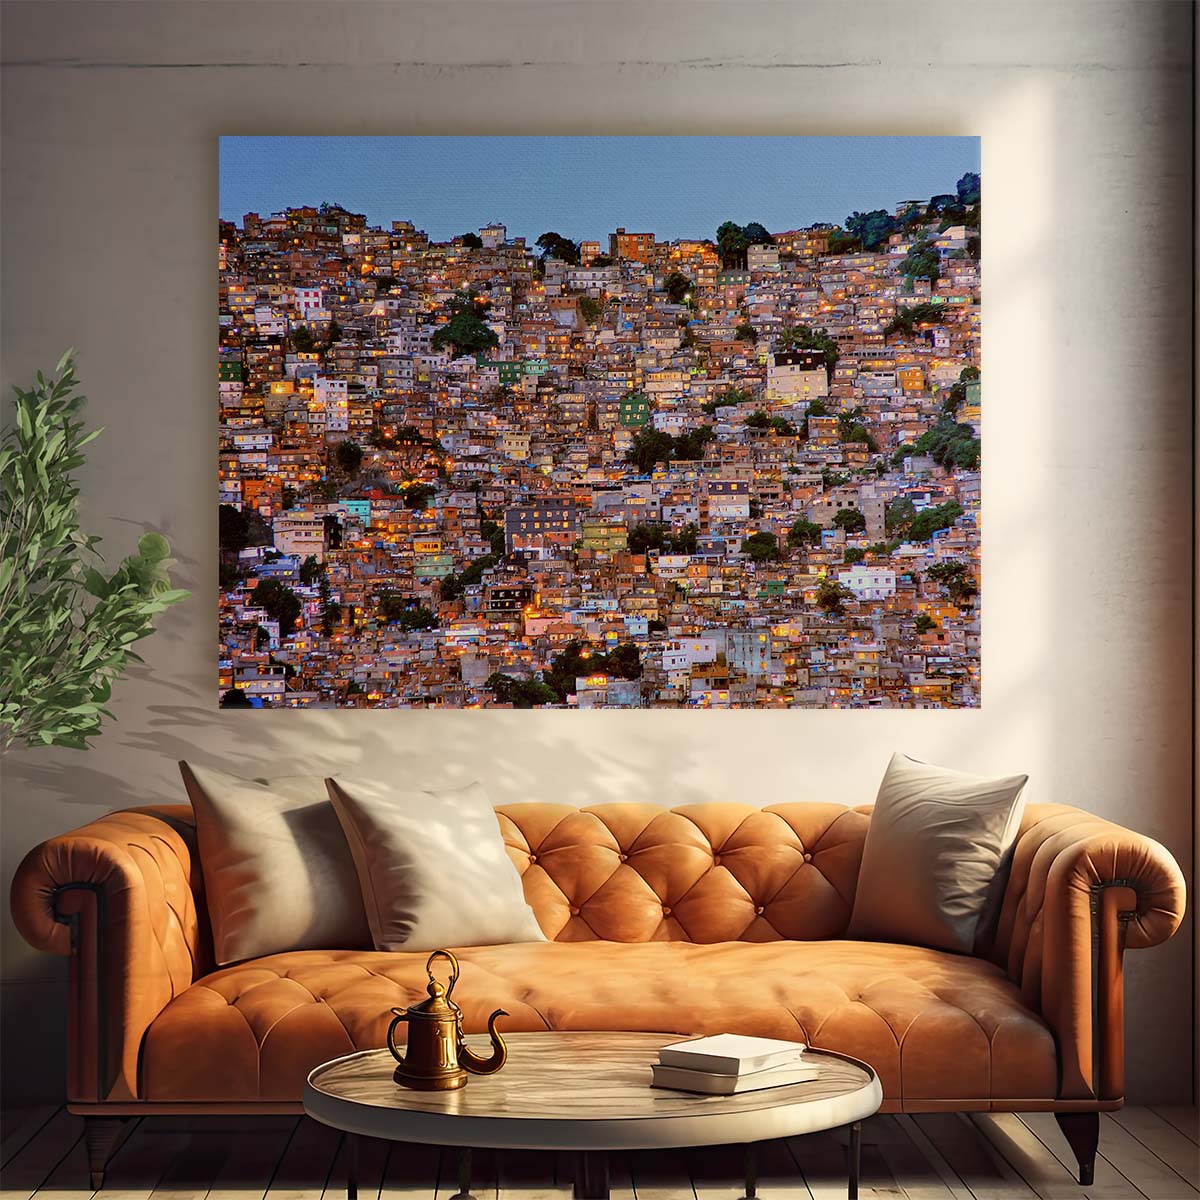 Colorful Rocinha Favela Rio Night Skyline Wall Art by Luxuriance Designs. Made in USA.